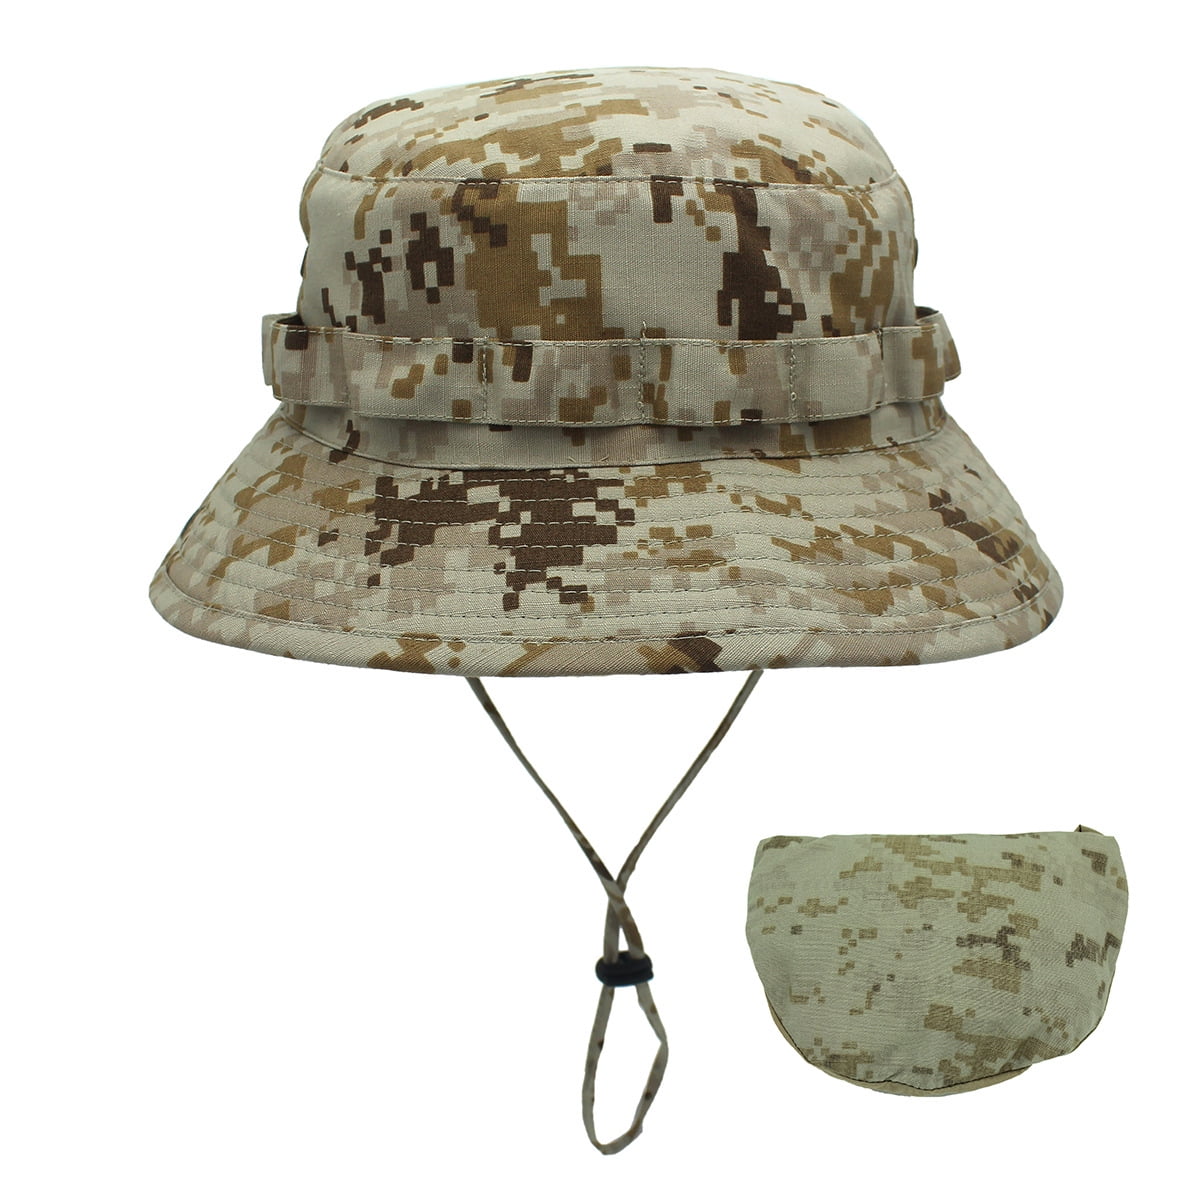 DESERT CAMOUFLAGE Military Boonie Bush Fishing Hiking Neck Flap Sun Cover Hat 